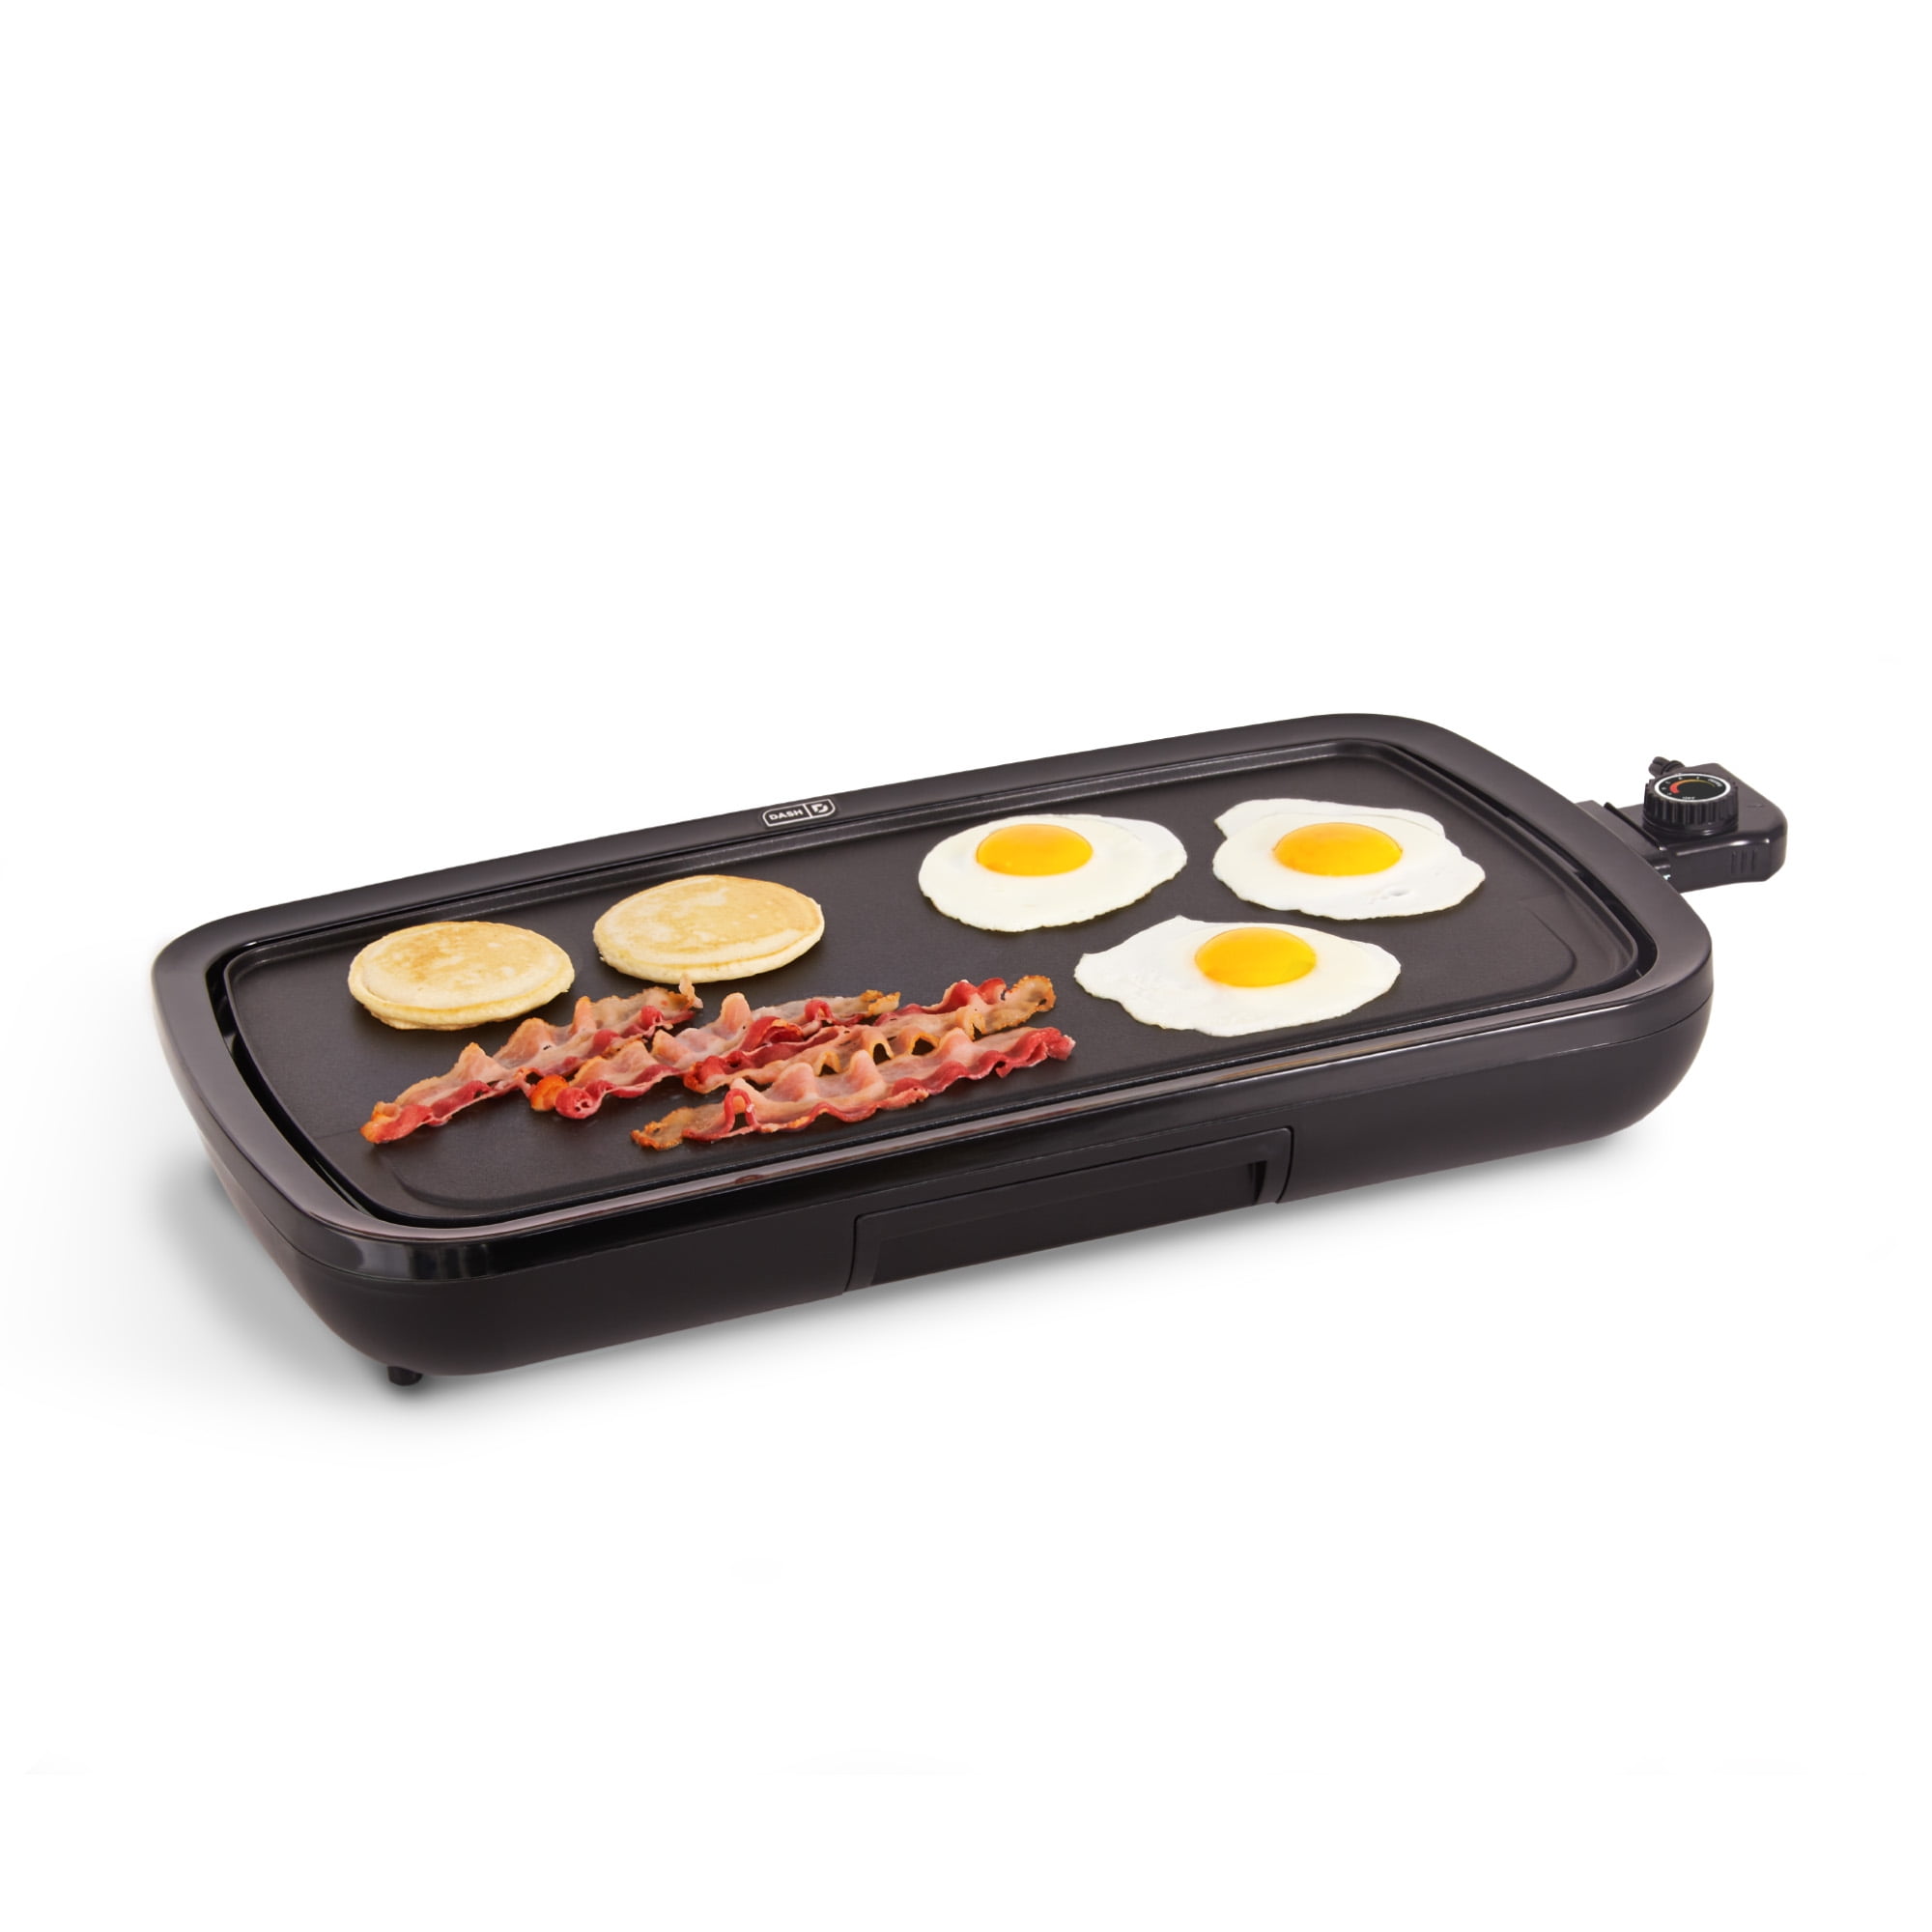  DASH Deluxe Everyday Electric Griddle with Dishwasher Safe  Removable Nonstick Cooking Plate & Express 8” Waffle Maker for Waffles,  Paninis, Hash Browns + other Breakfast, Lunch: Home & Kitchen